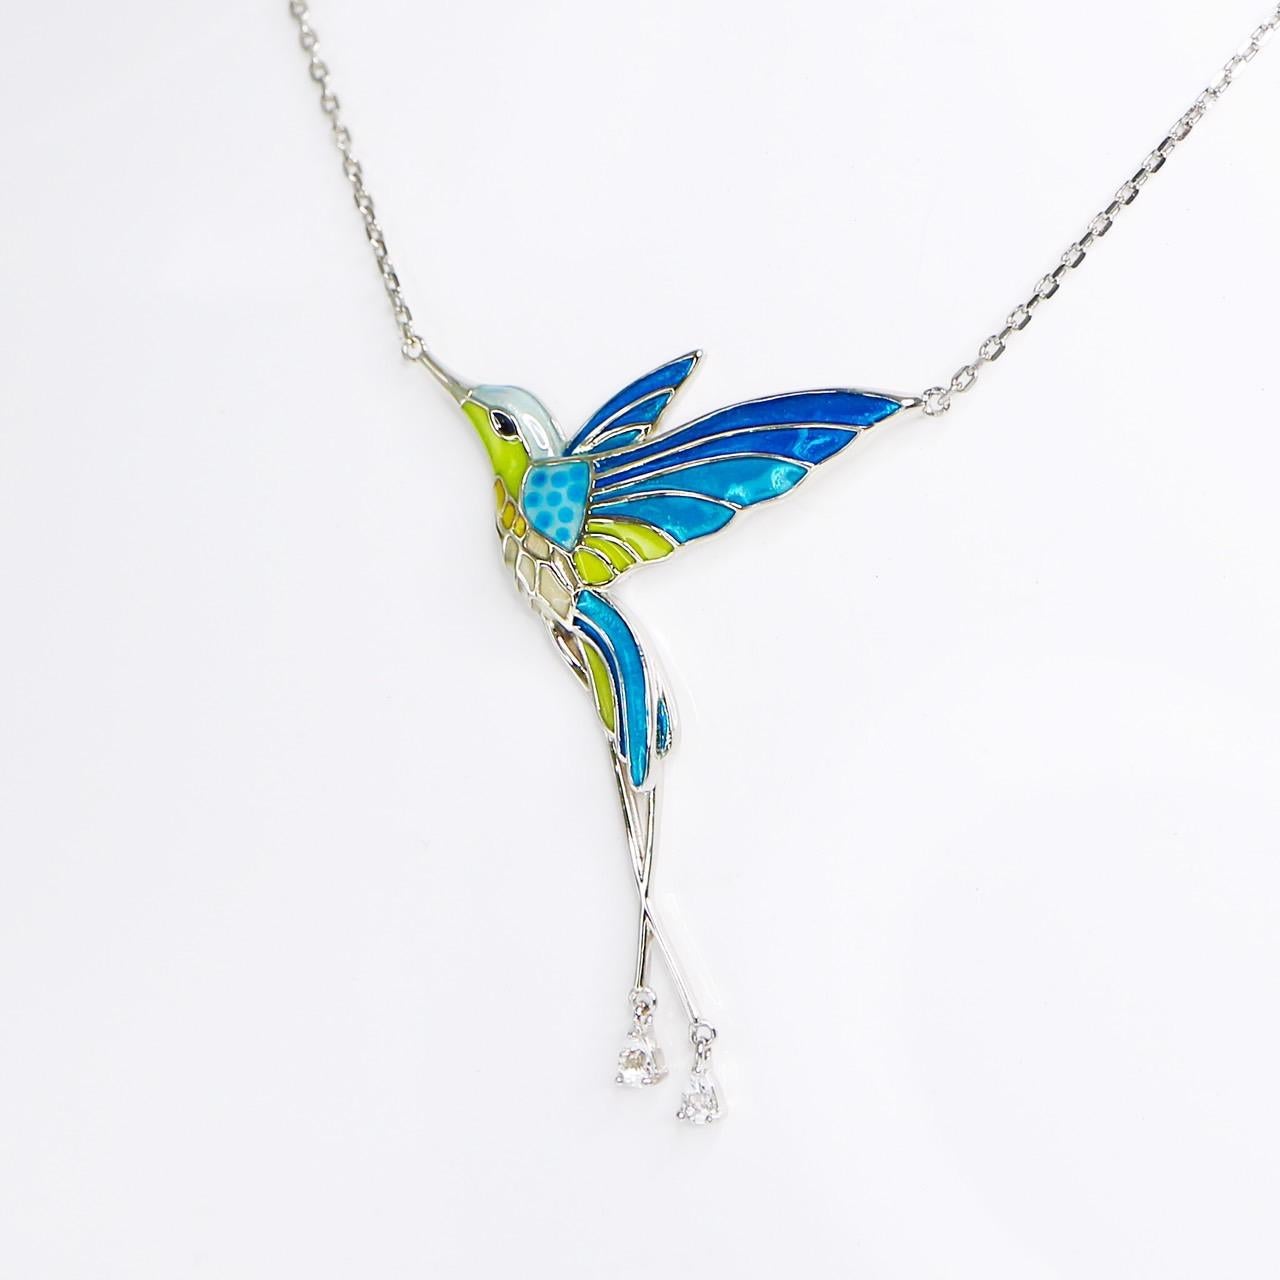 *925 Sterling Silver Swallow Enamel Antique Stud Necklace*

Swallow shape enamel on the white gold plated 925 sterling silver band with fine workmanship and enamel art. 

The earrings combine fashion and classic design ideas and are suitable for